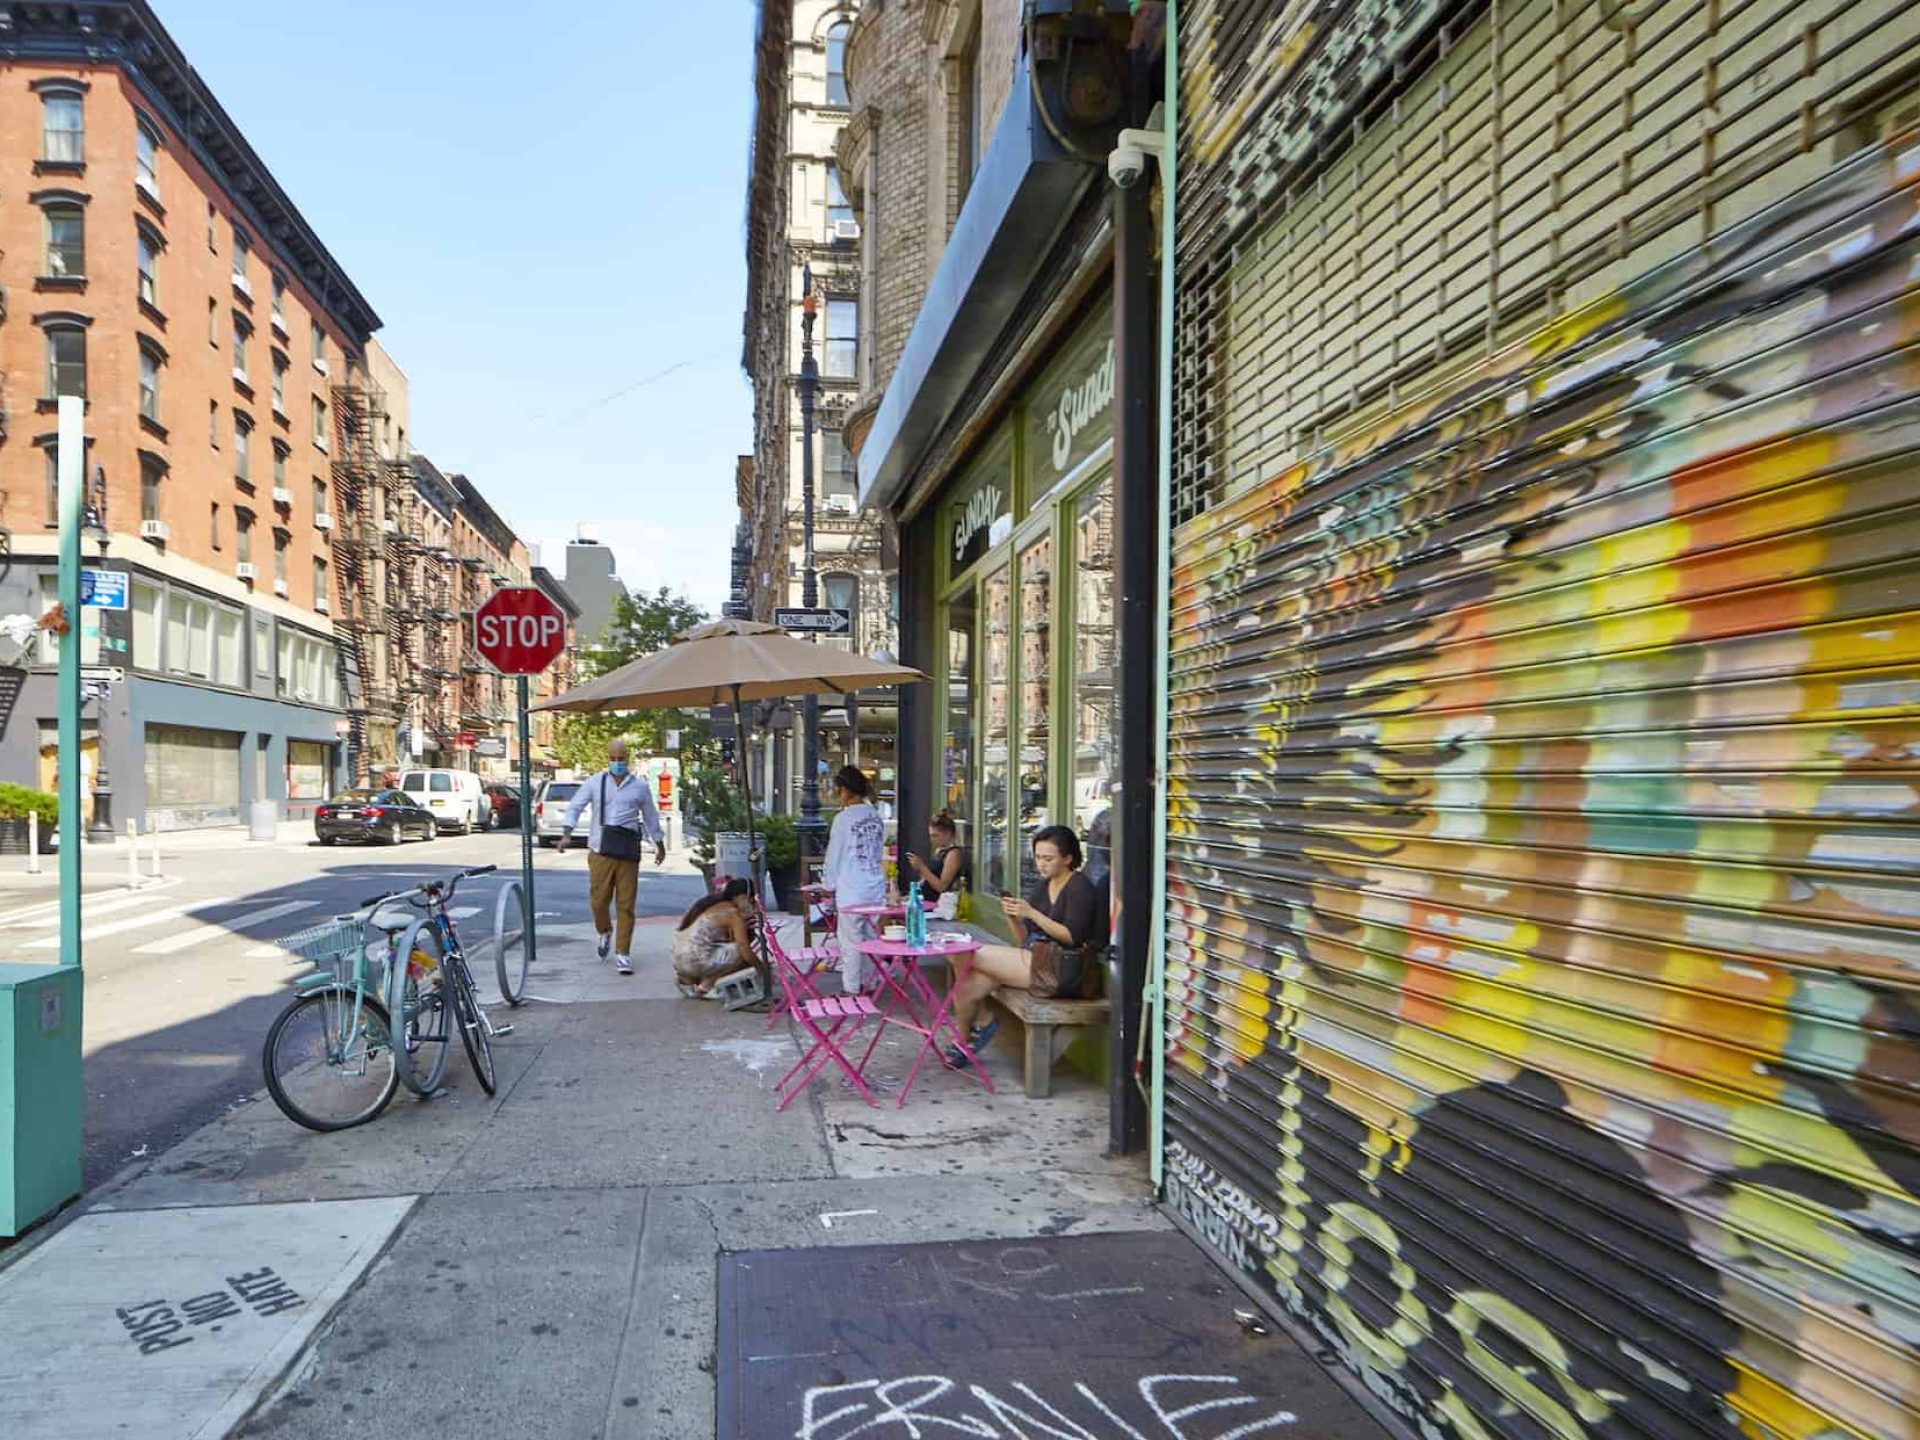 Sidewalk in New York with metal security door painted in street art and people sitting outside of a restaurant on a bench.